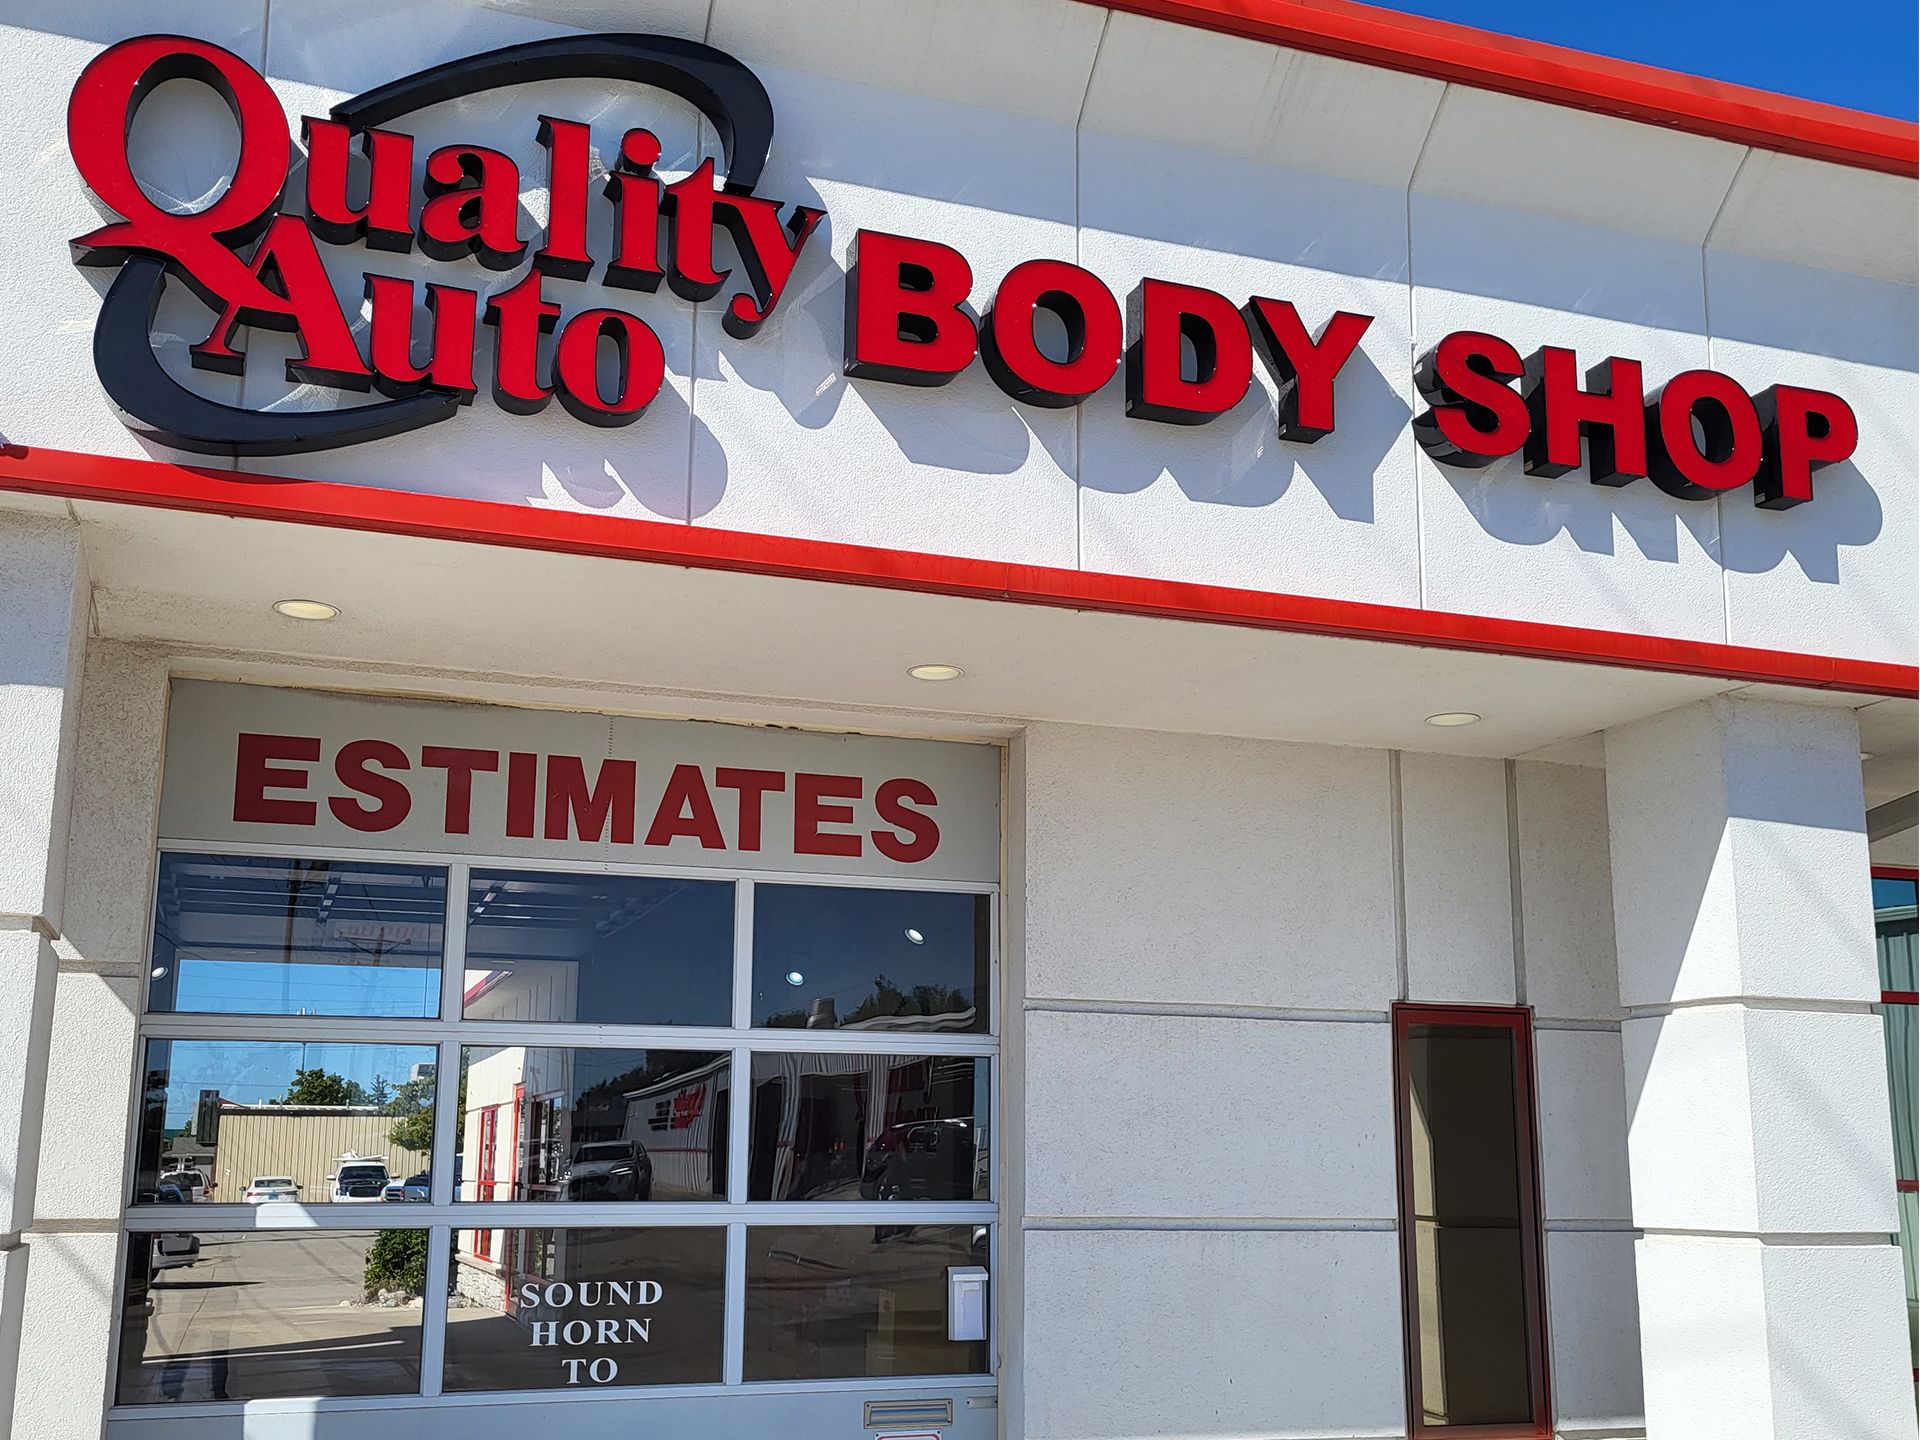 A quality auto body shop with estimates on the window